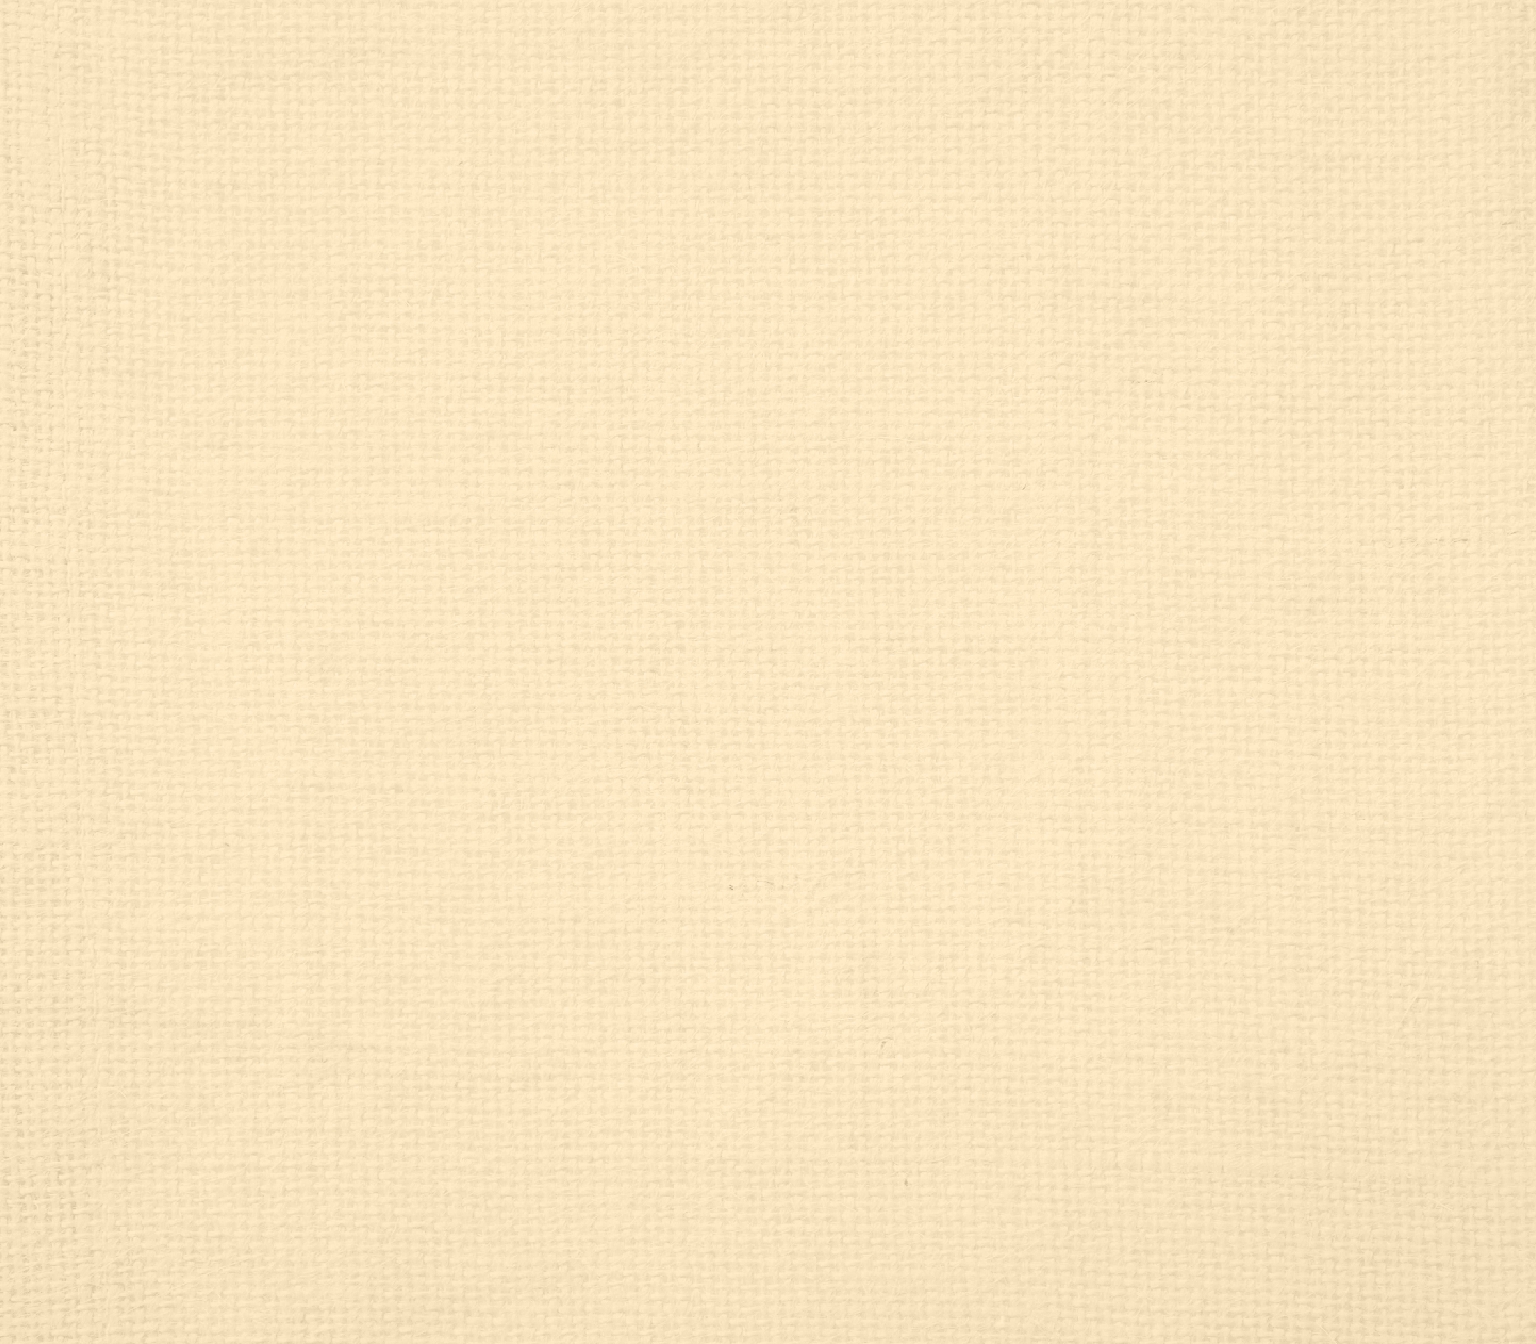 Solid Beige Quality Backgrounds For Powerpoint Templates Ppt ...